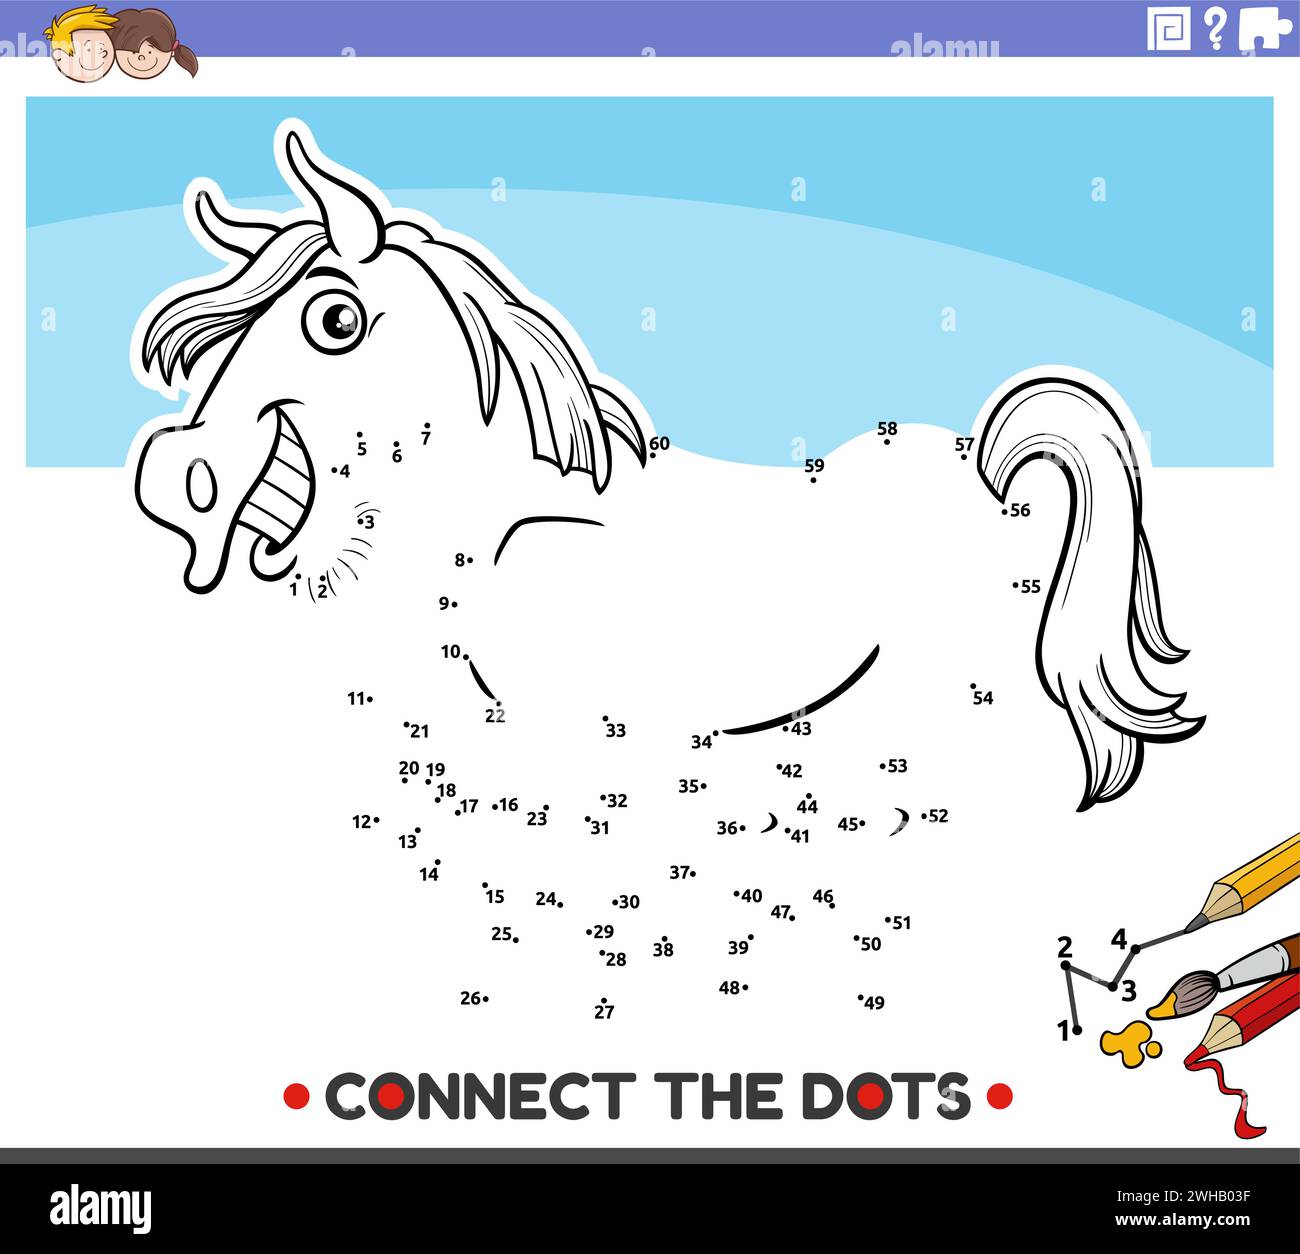 Cartoon illustration of educational connect the dots activity with horse farm animal character Stock Vector